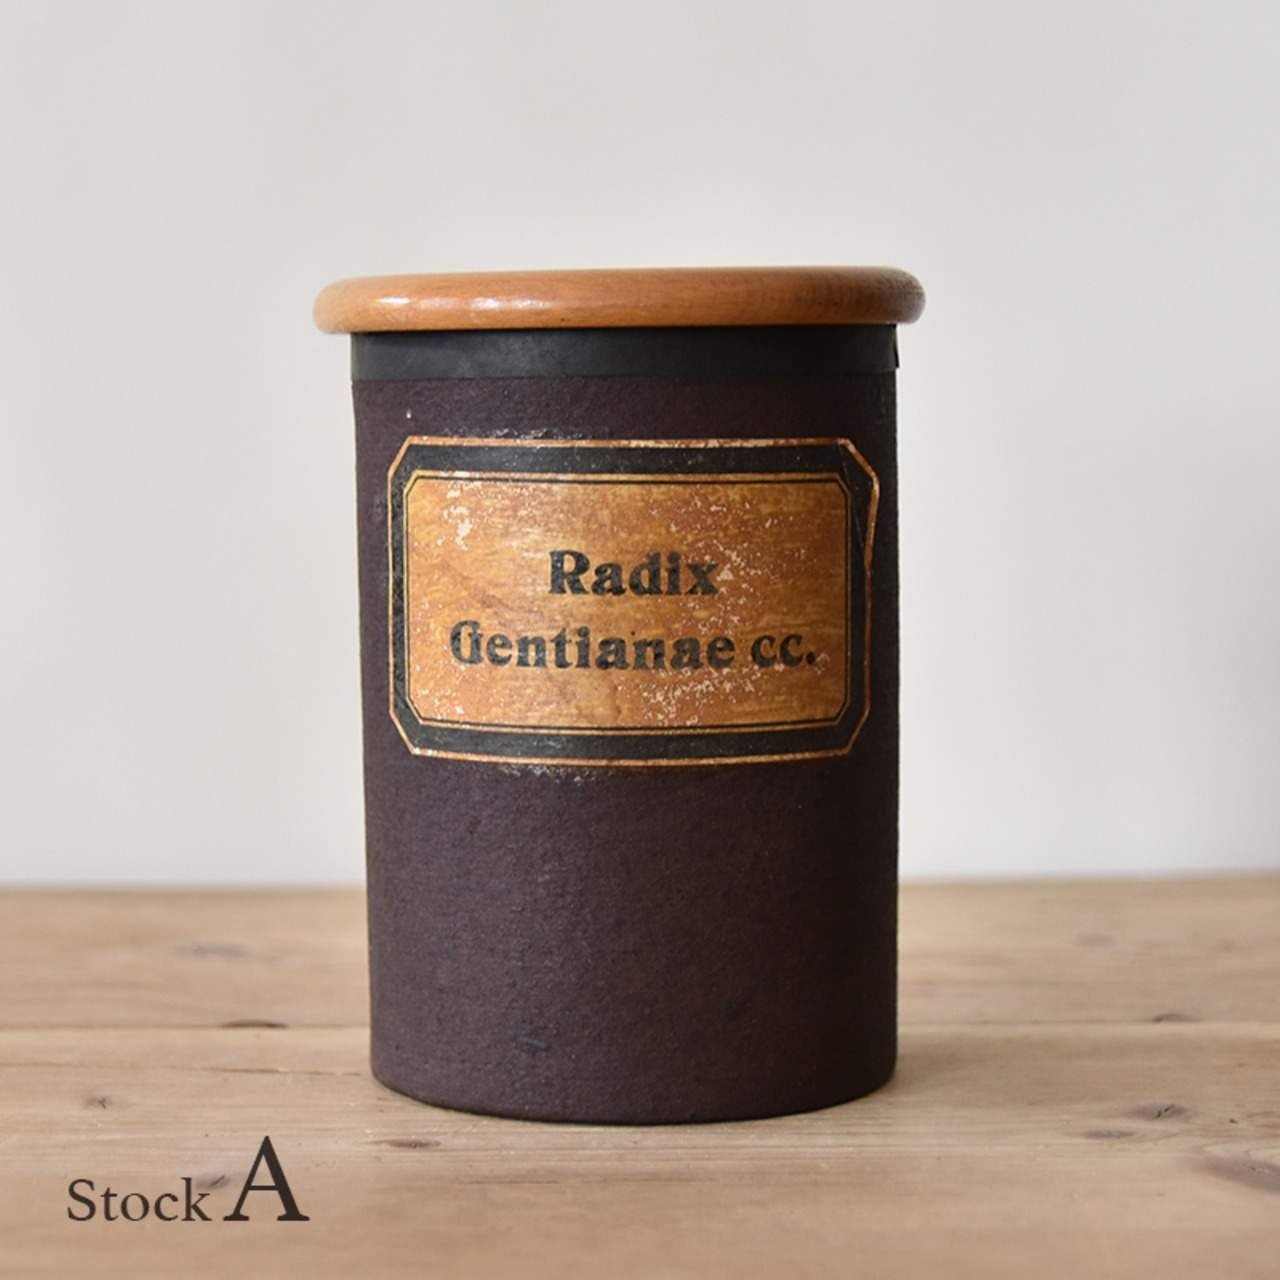 French Herb Canister【A】 / フレンチ ハーブ キャニスター / 2101-SLW-111375A